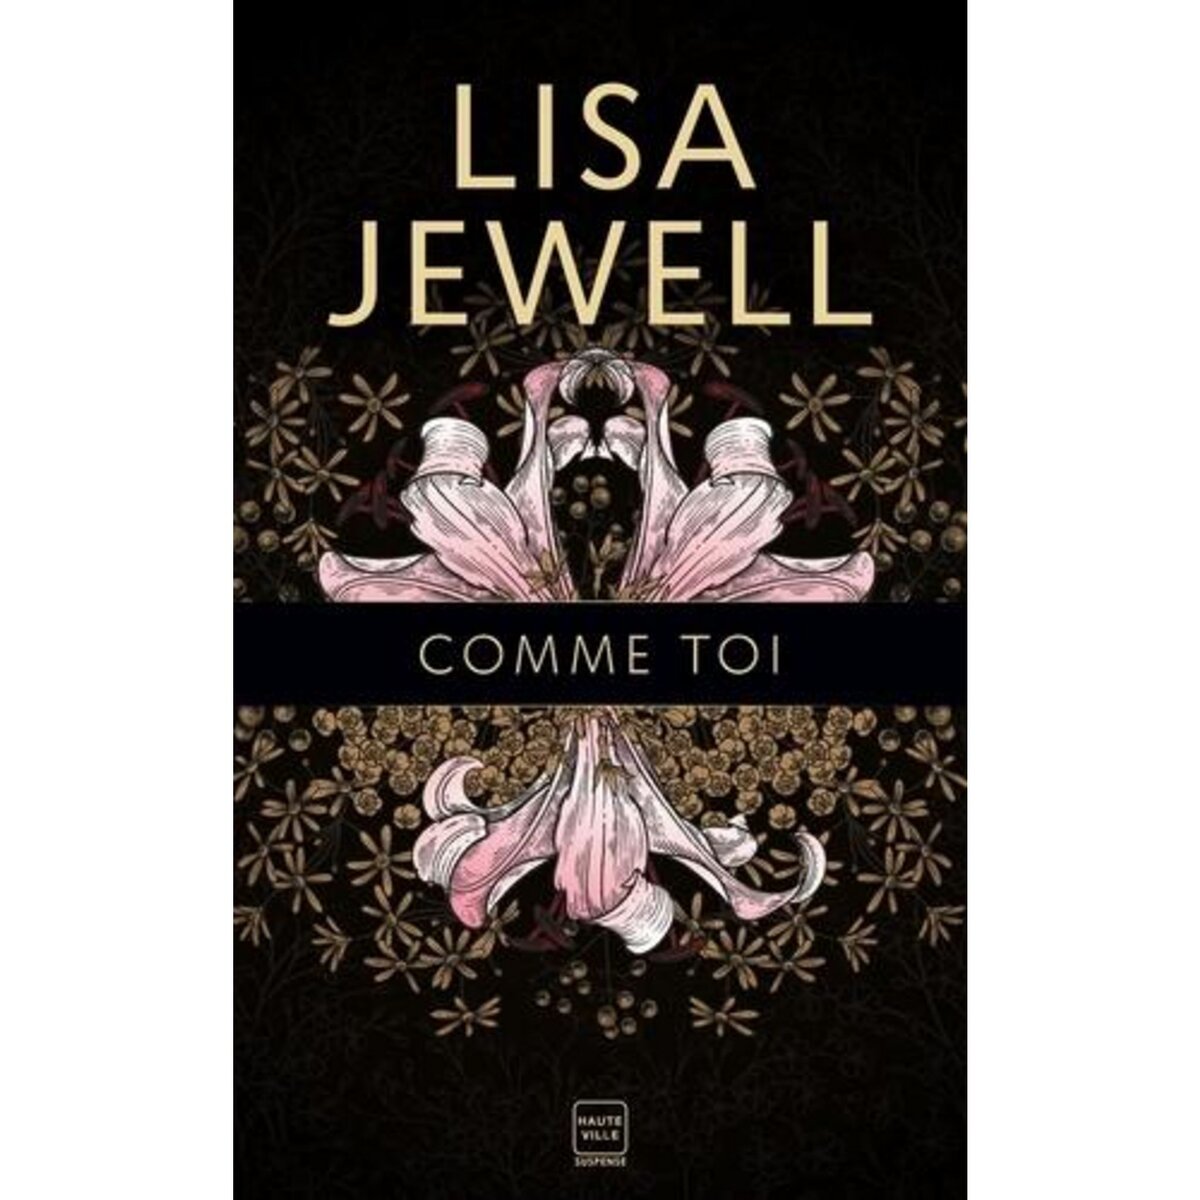  COMME TOI, Jewell Lisa